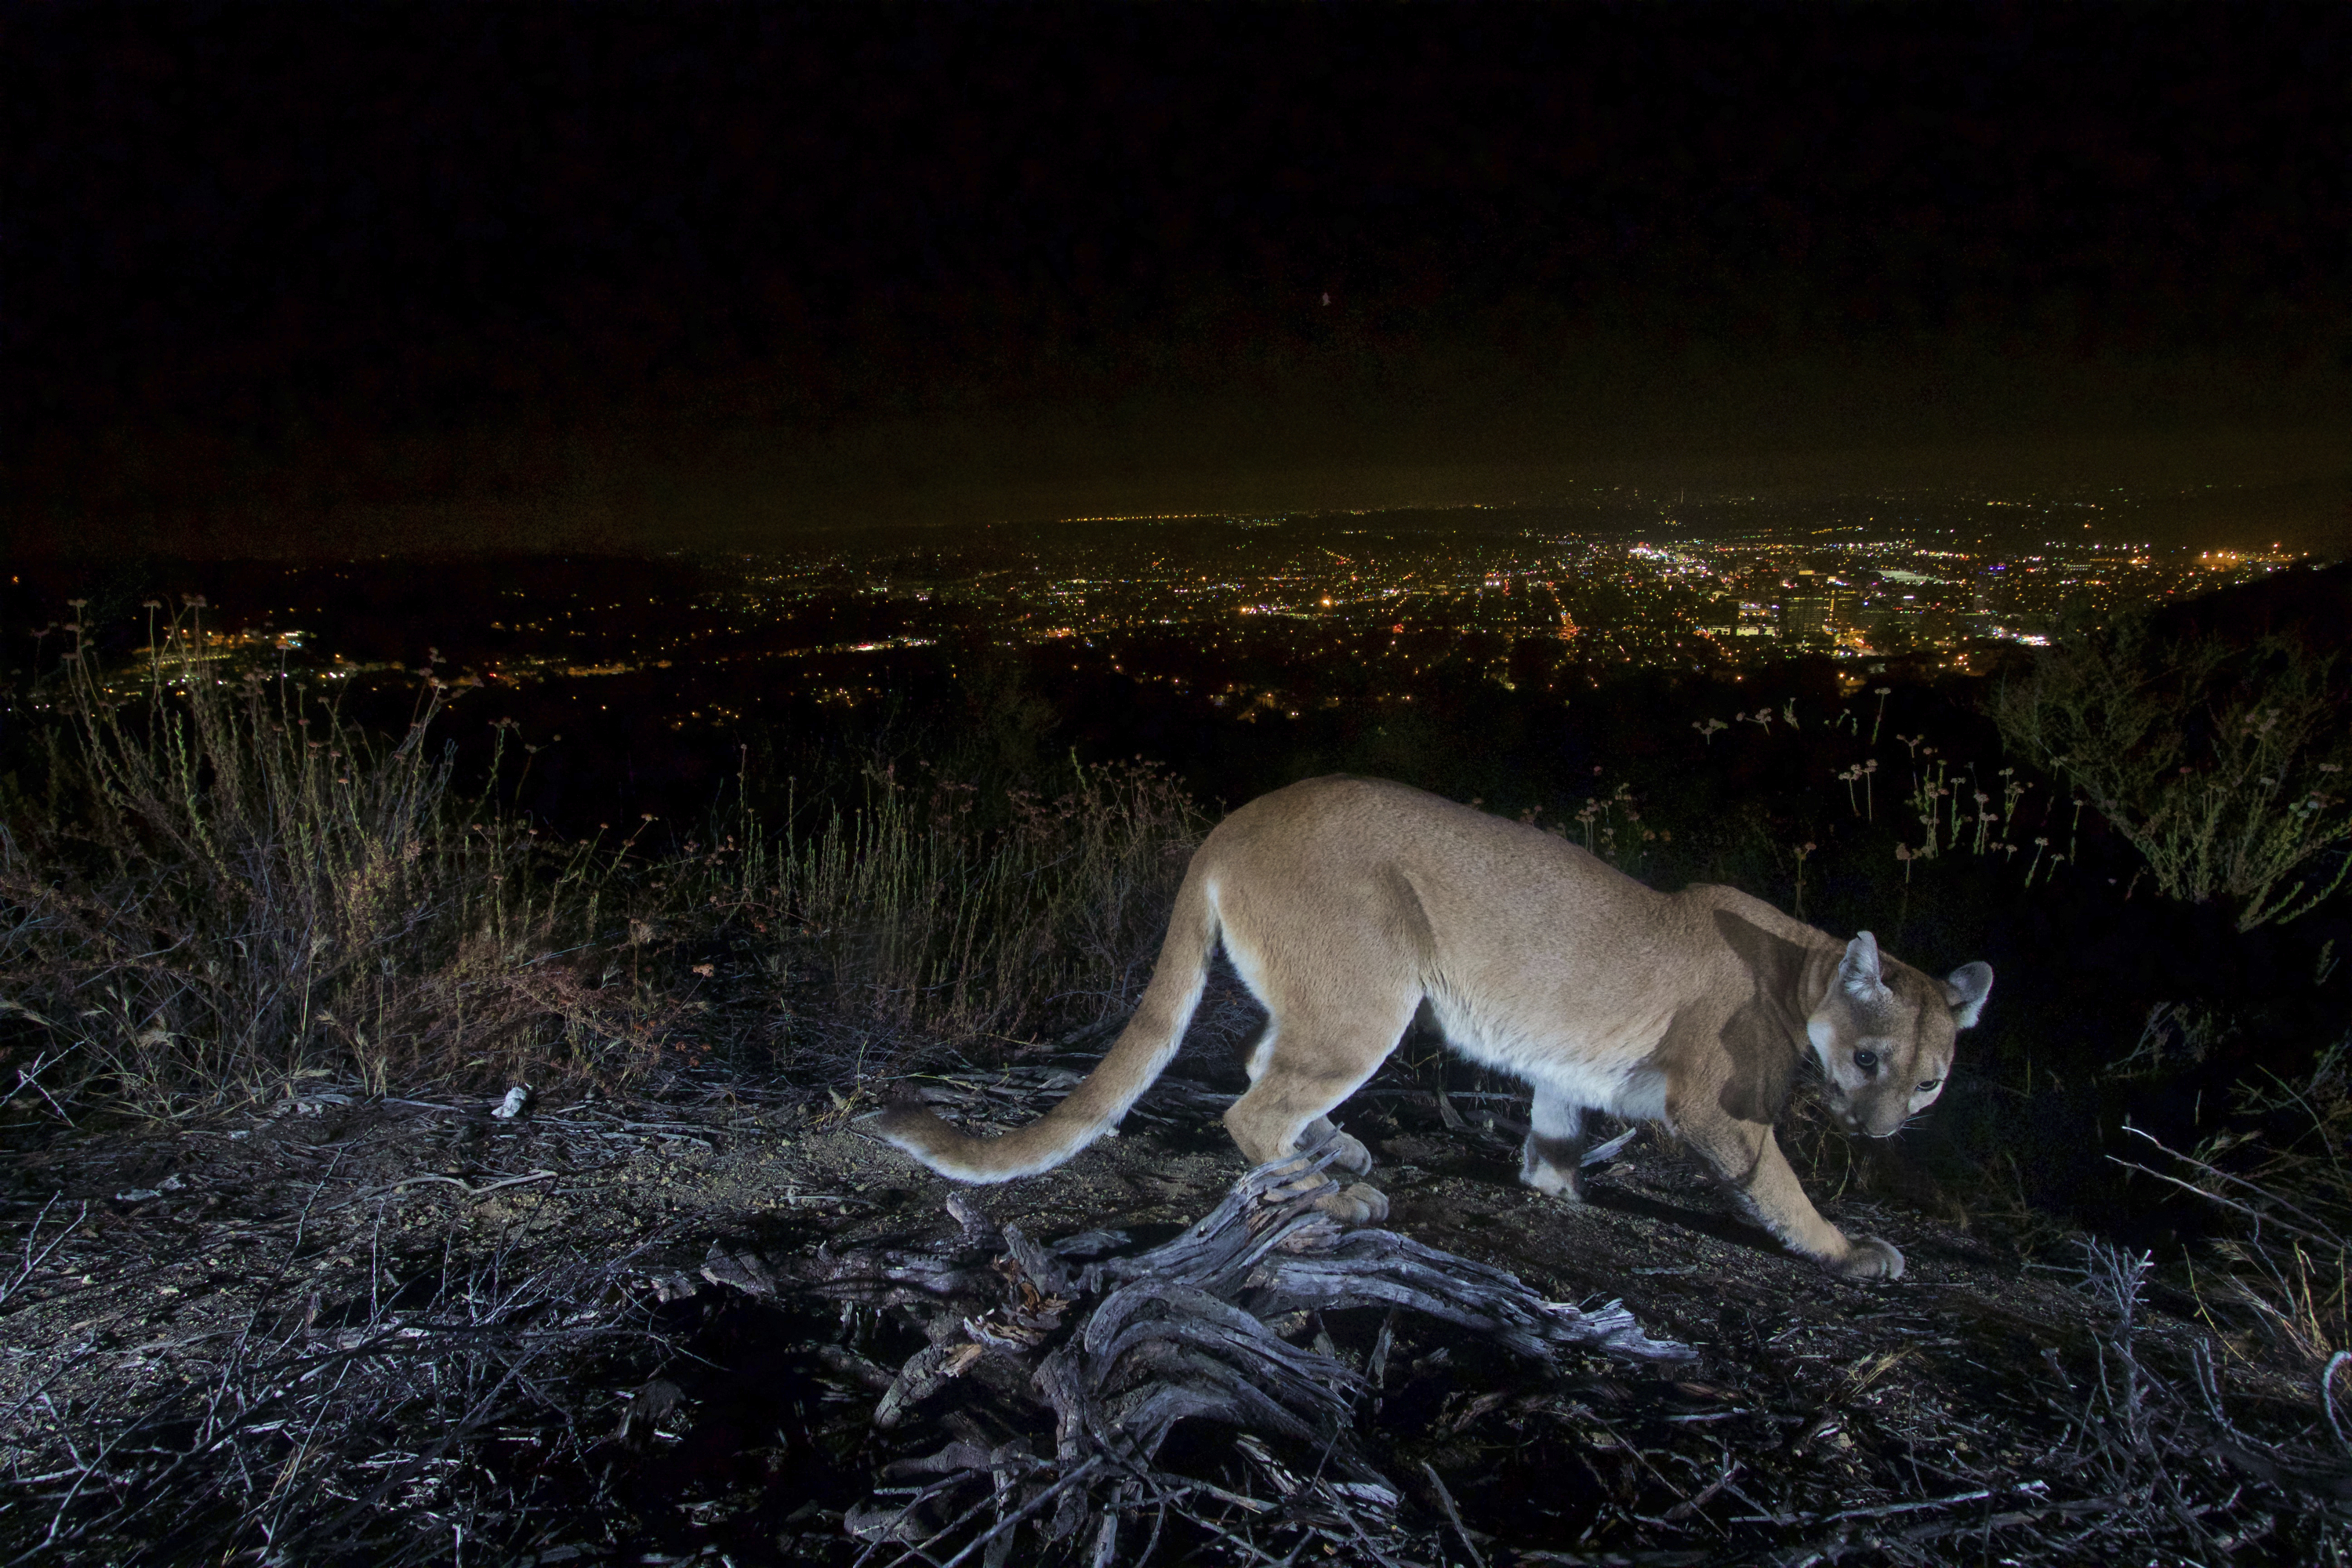 A cougar prowls on a hill with a sprawling city's lights below at night.